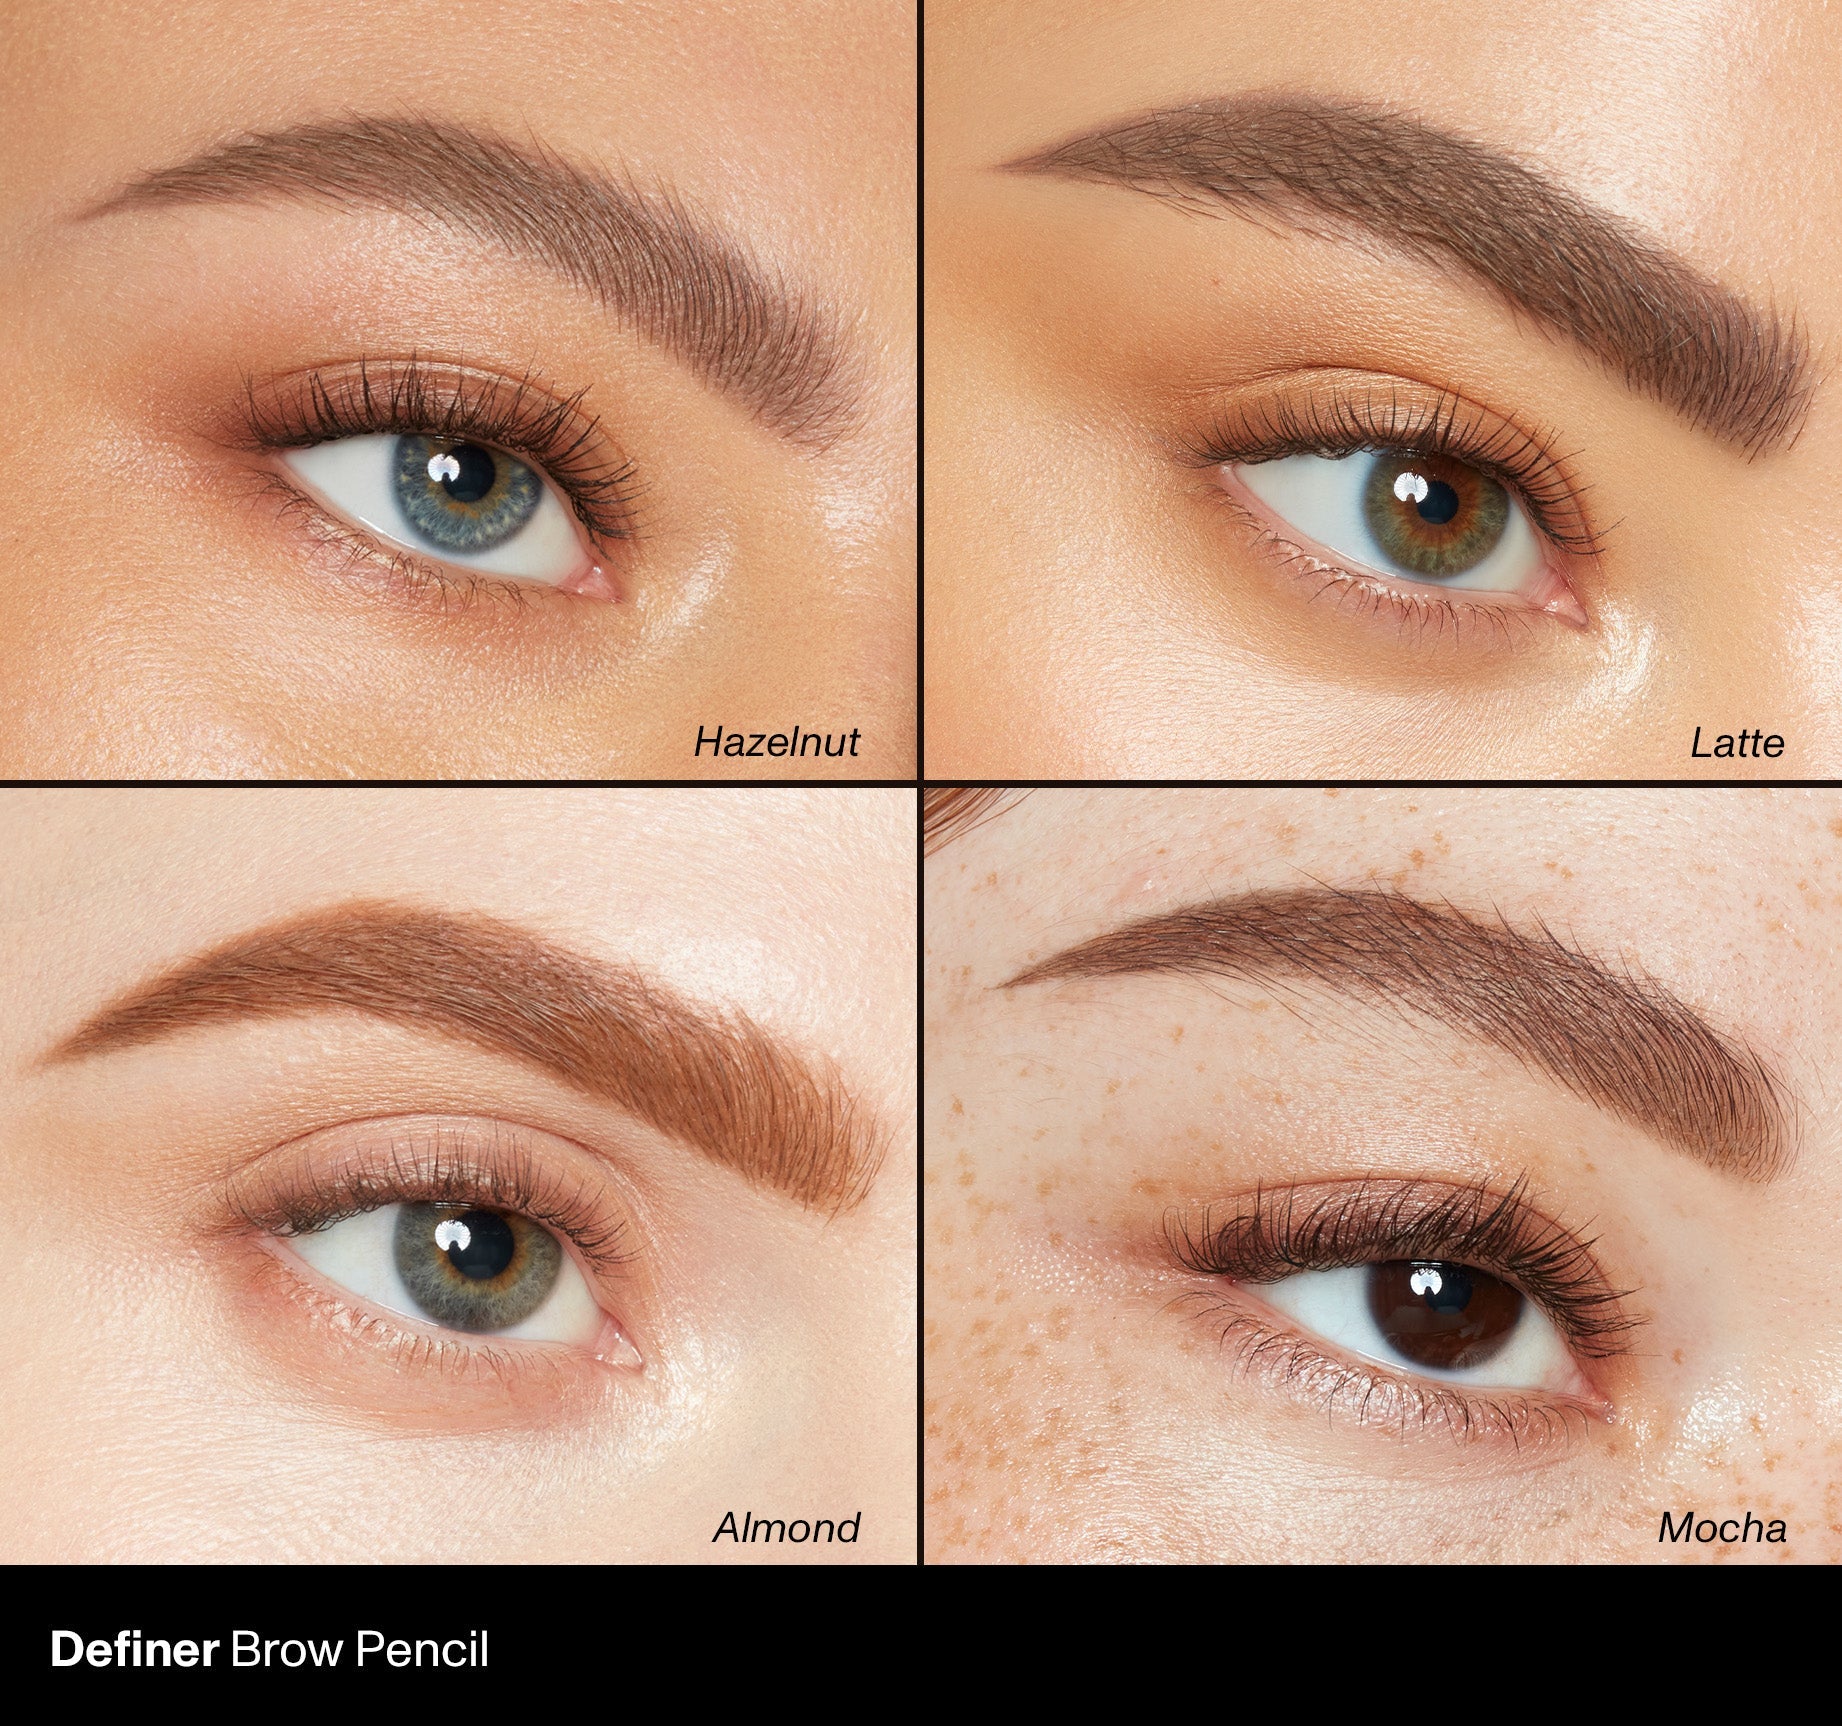 Definer Dual-Ended Brow Pencil & Spoolie - Almond - Image 3